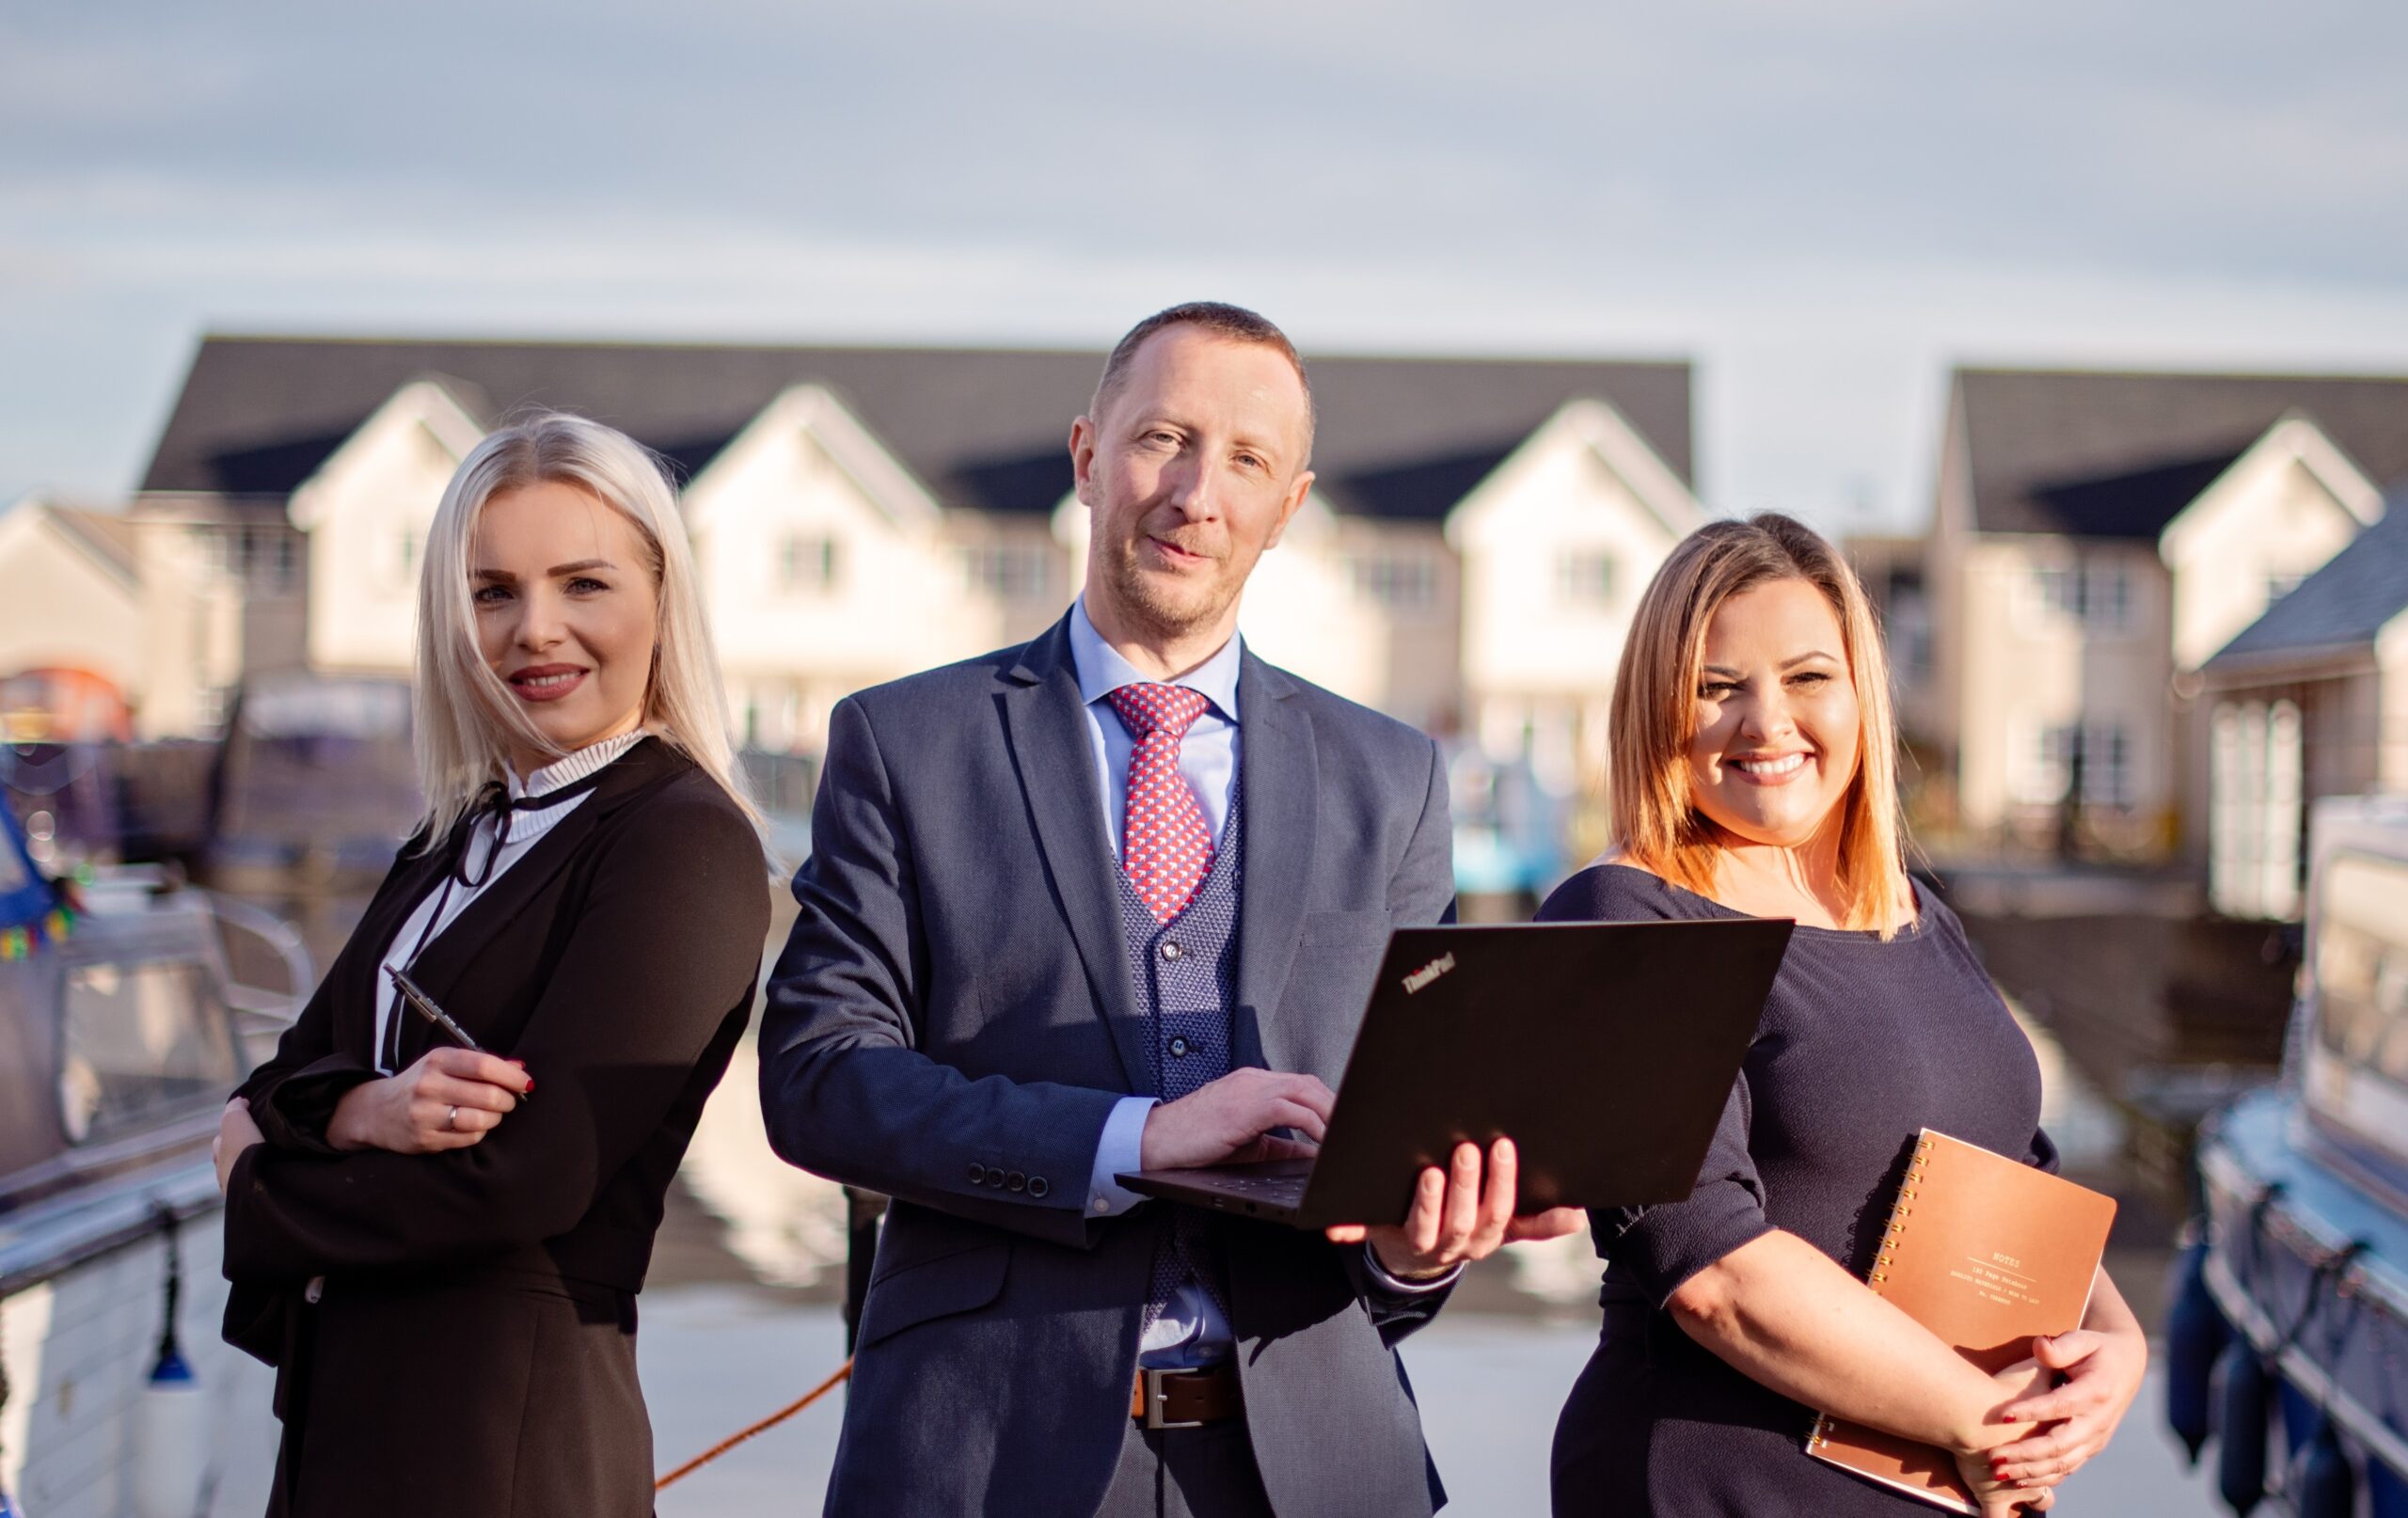 The trio of mortgage advisors at Getmortgage.uk